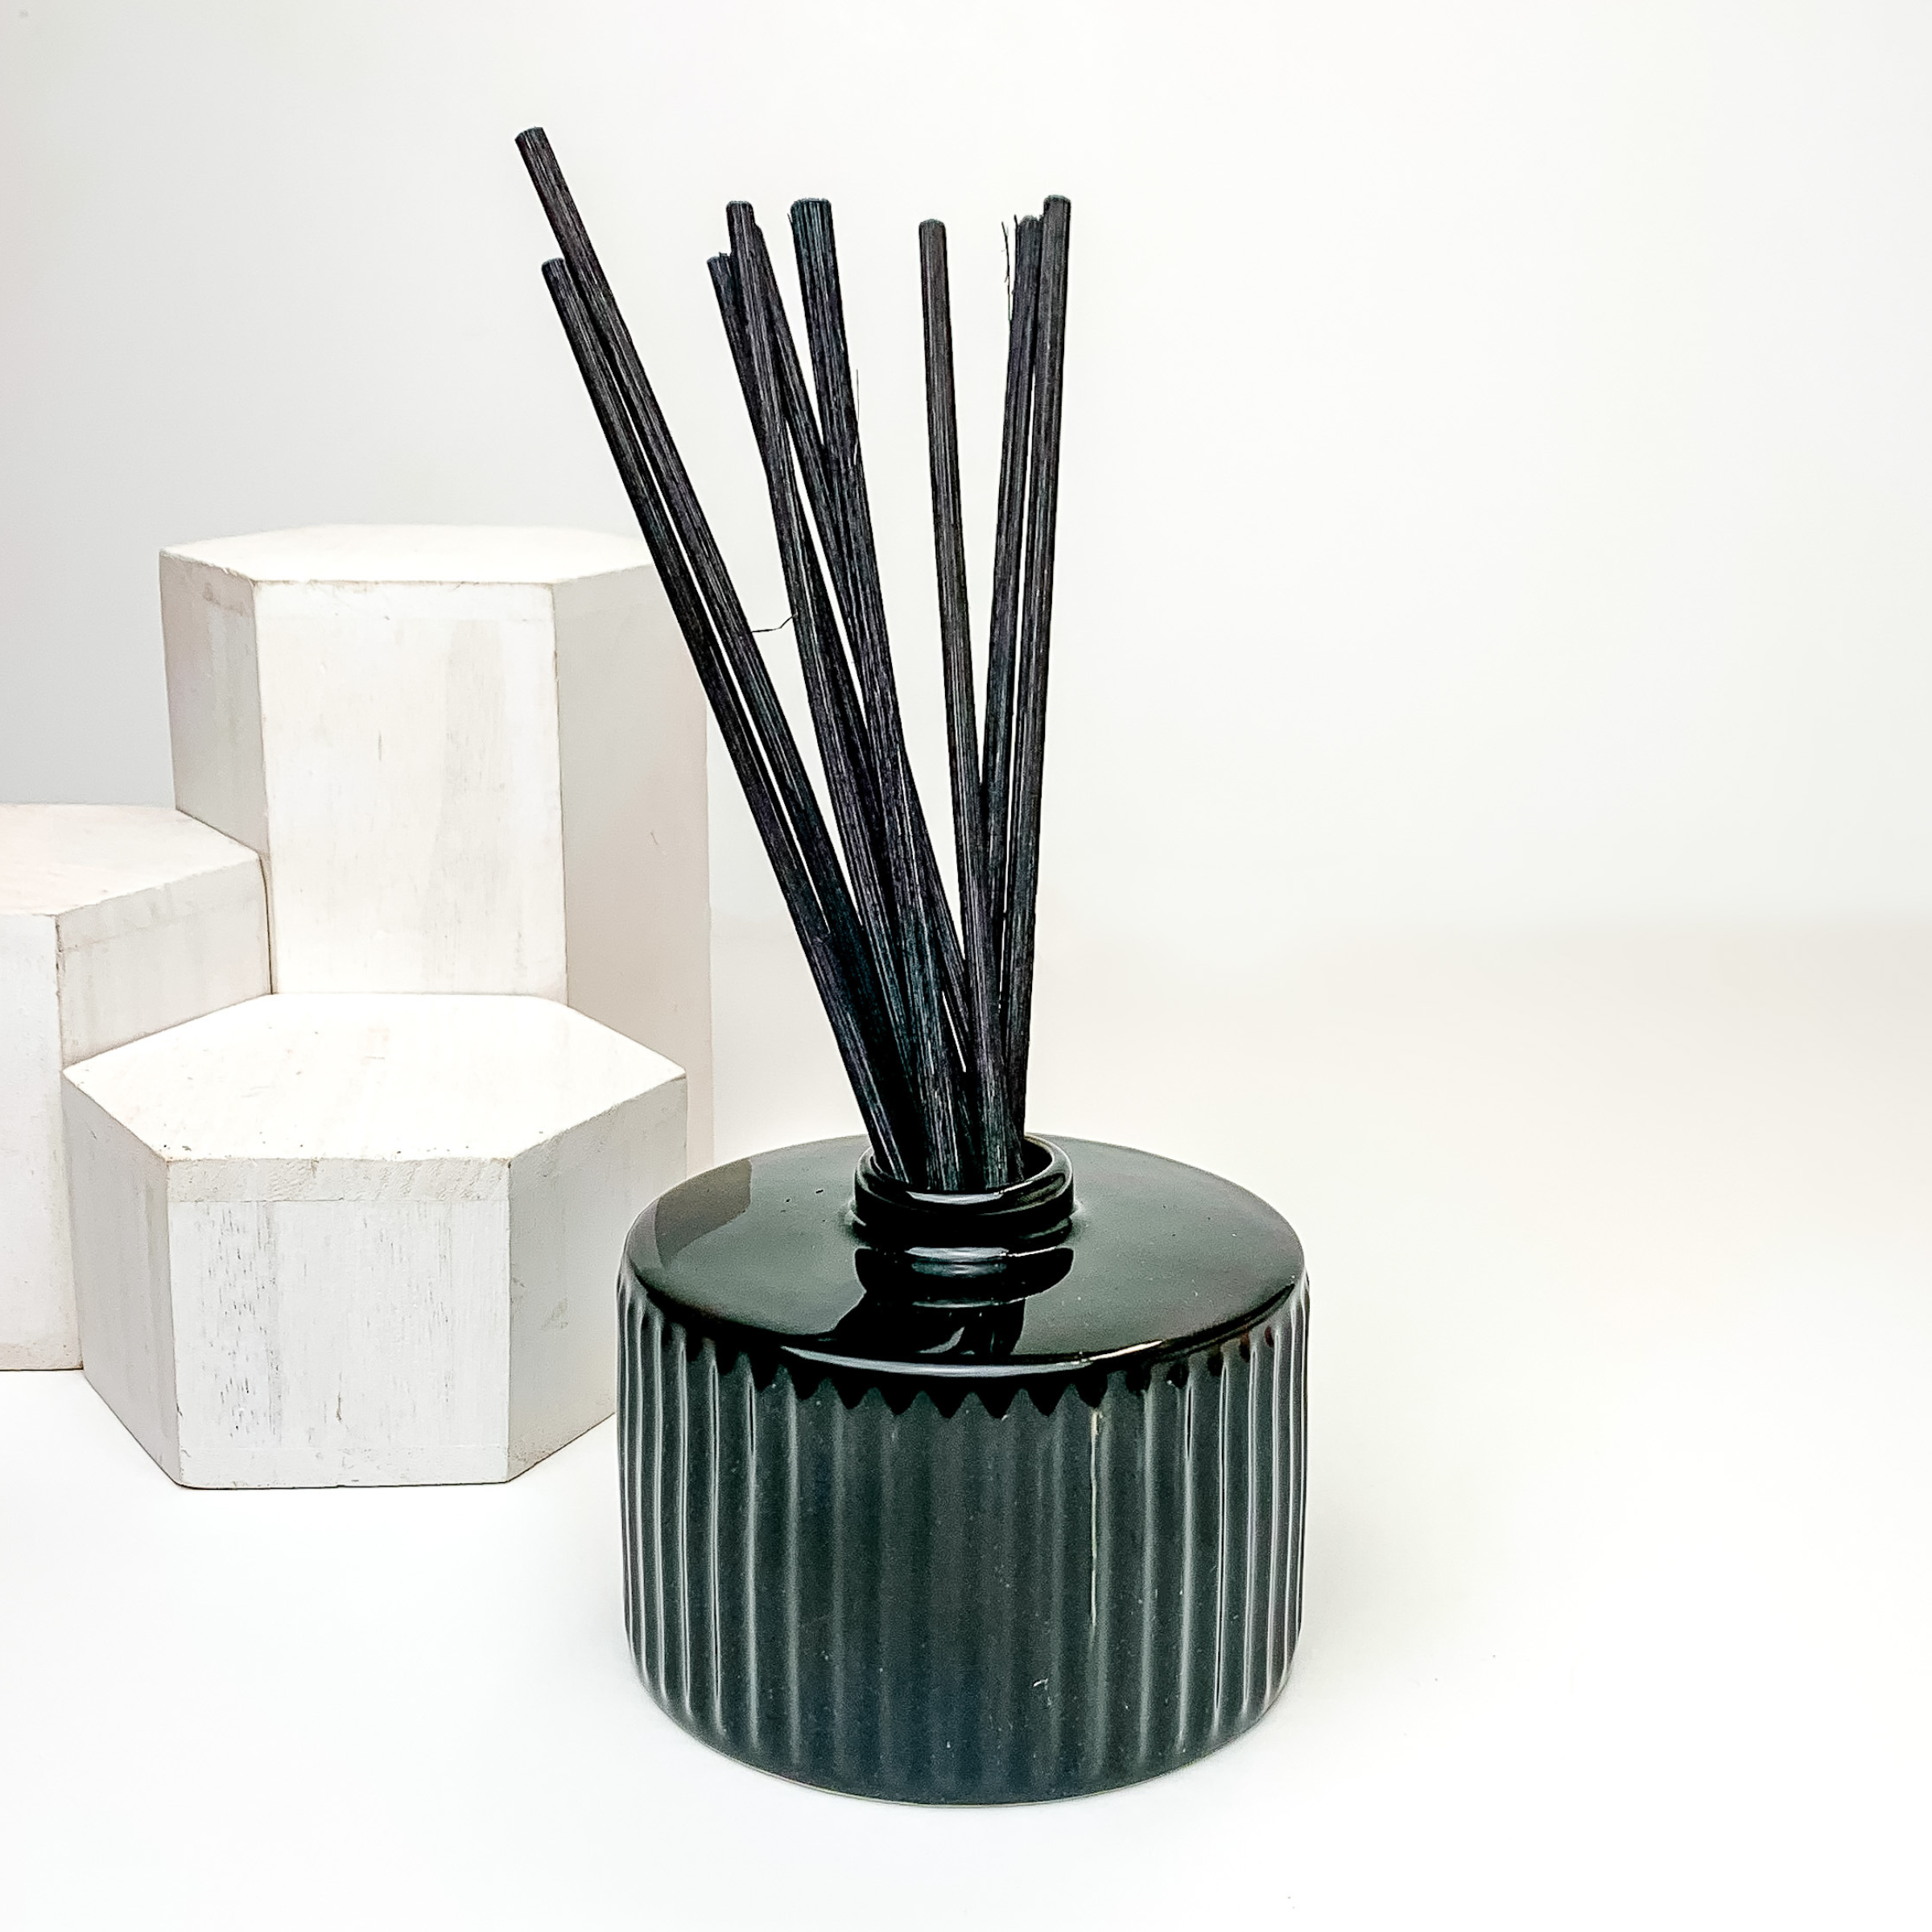 Black diffuser holder with black reeds sticking out of the top. This diffuser is pictured on a white background with white blocks on the left side of the candle. 